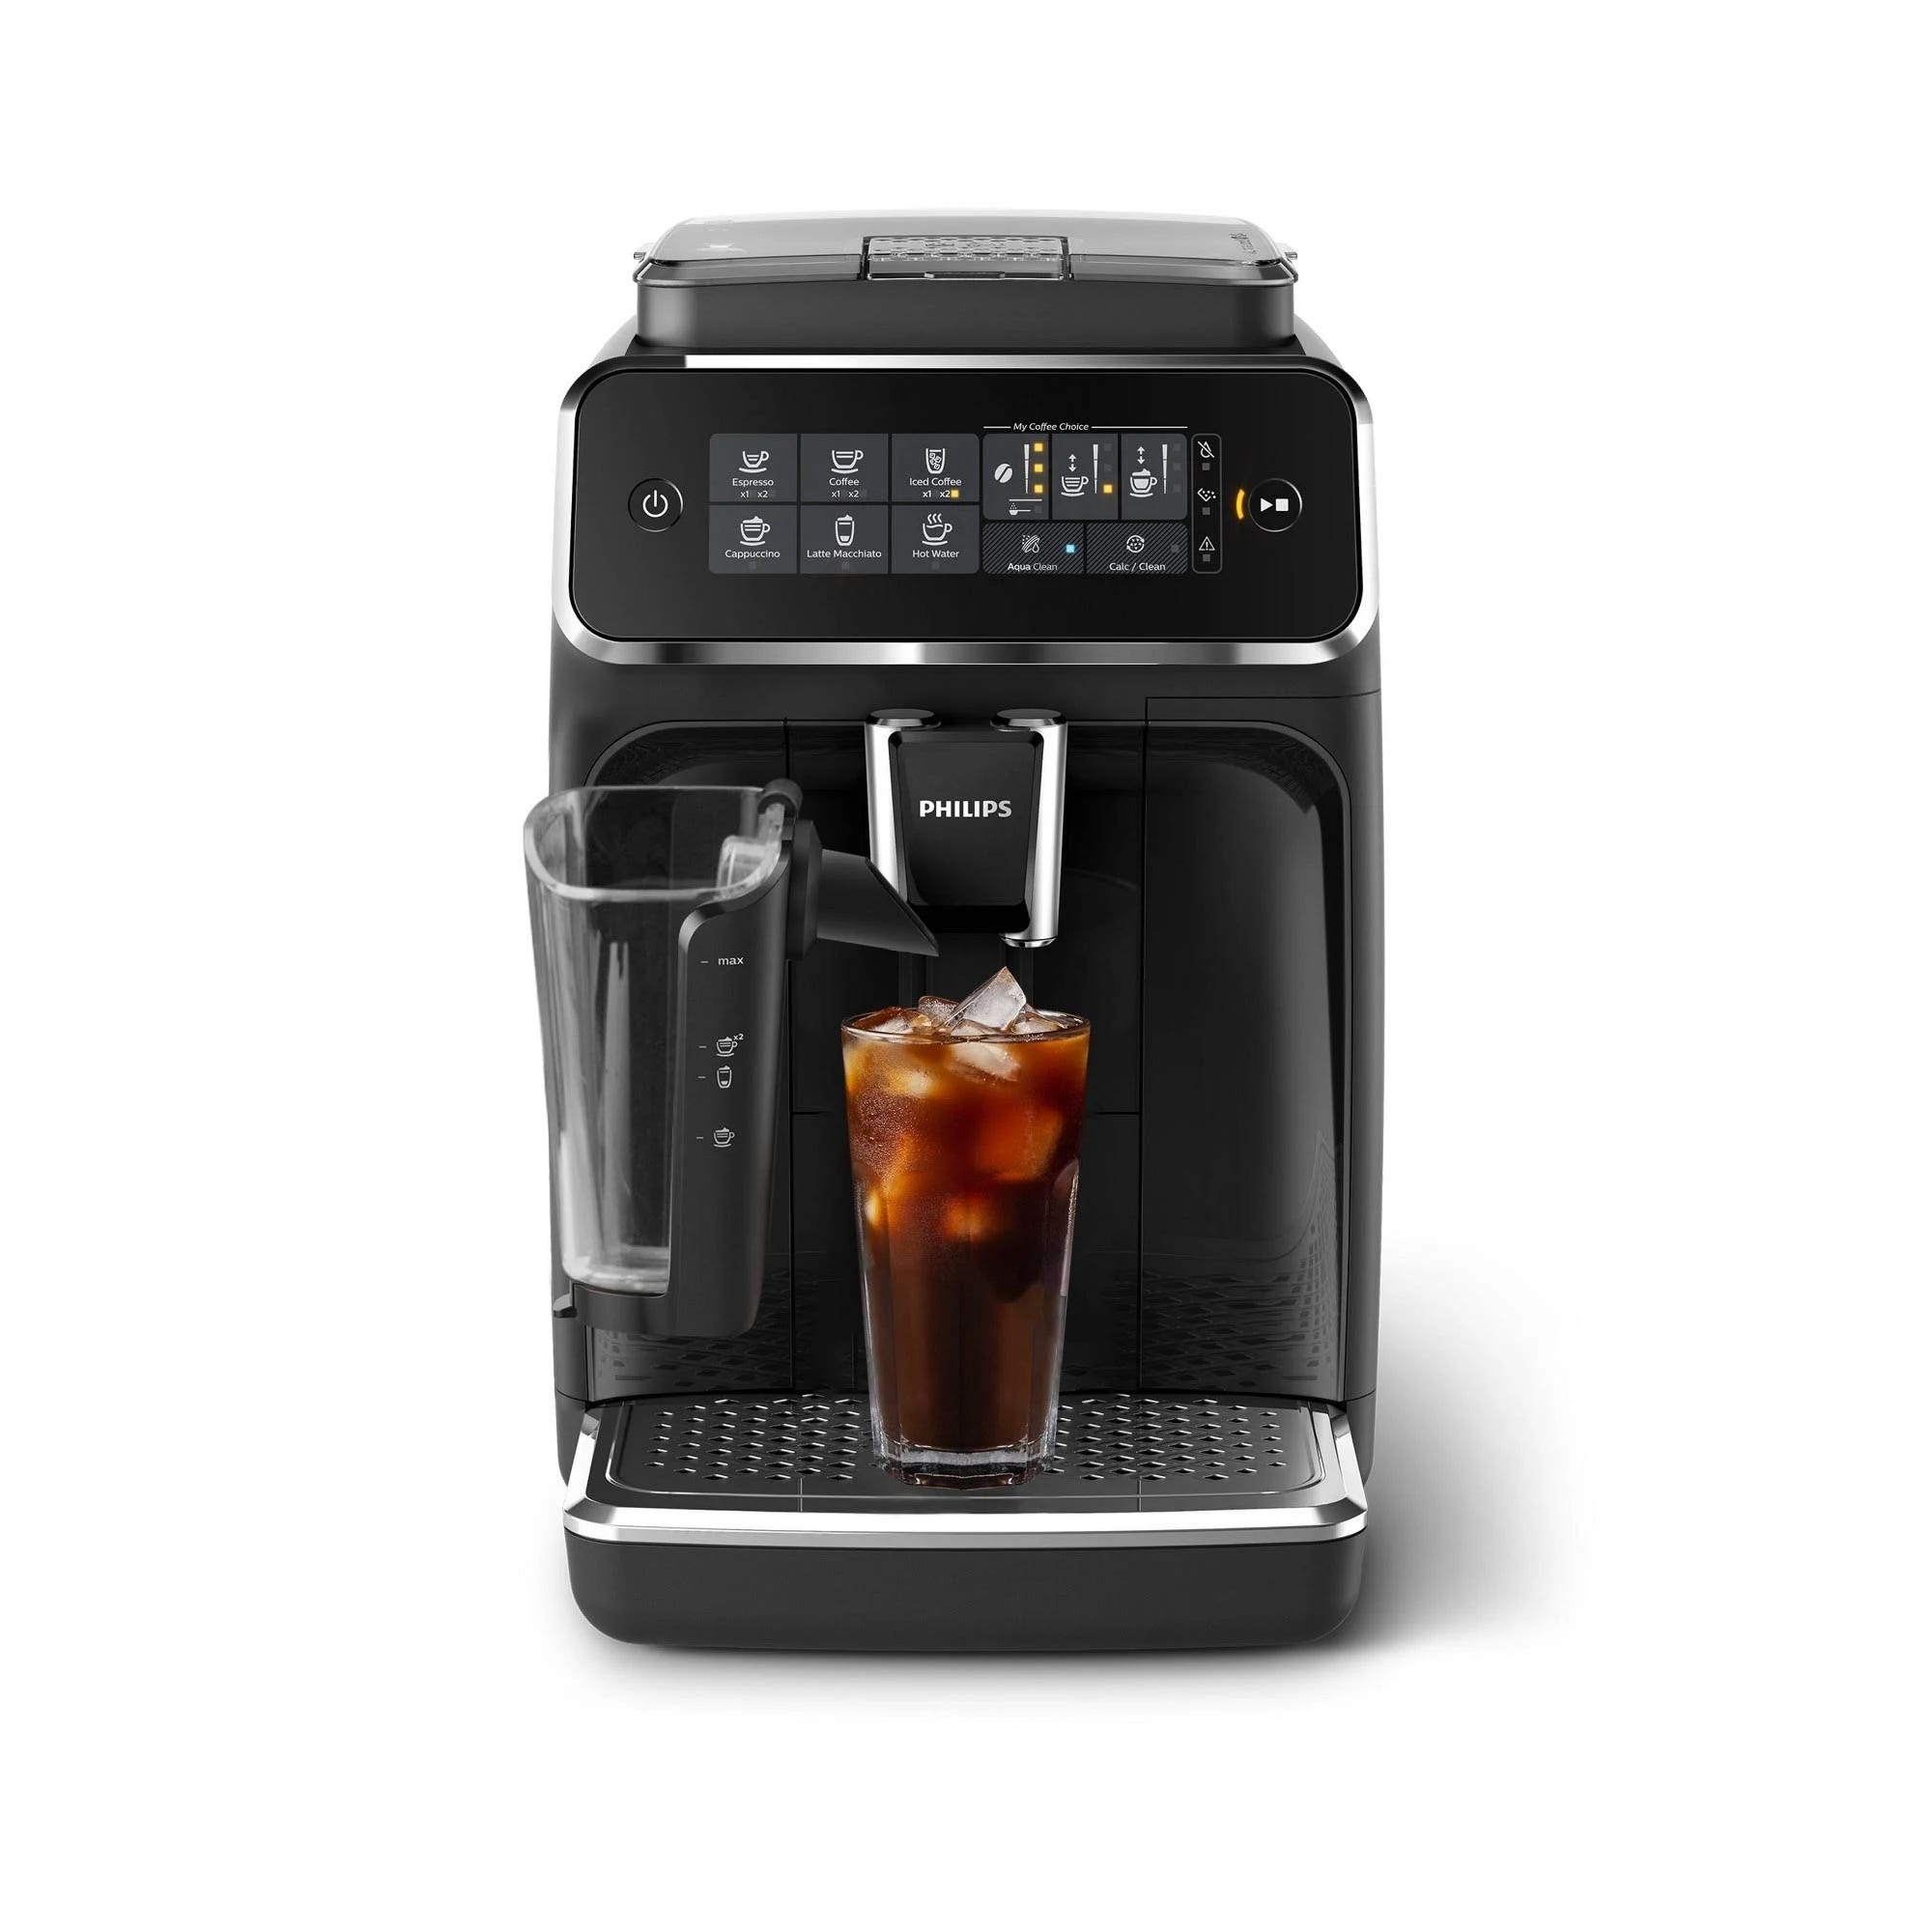 Philips 3200 Series Fully Automatic Espresso Machine with LatteGo & Iced Coffee | Image